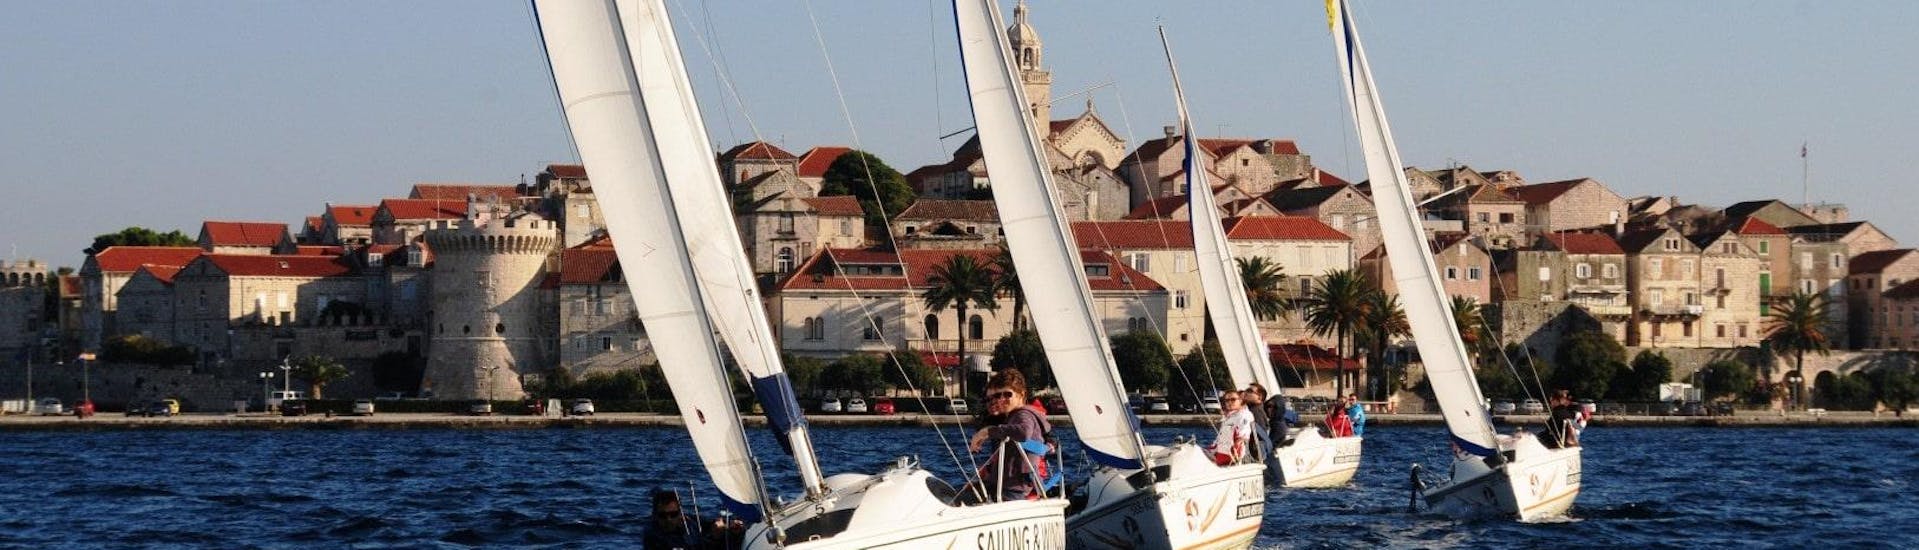 Full-day Sailing Keelboat Trip from Korčula with Swimming.